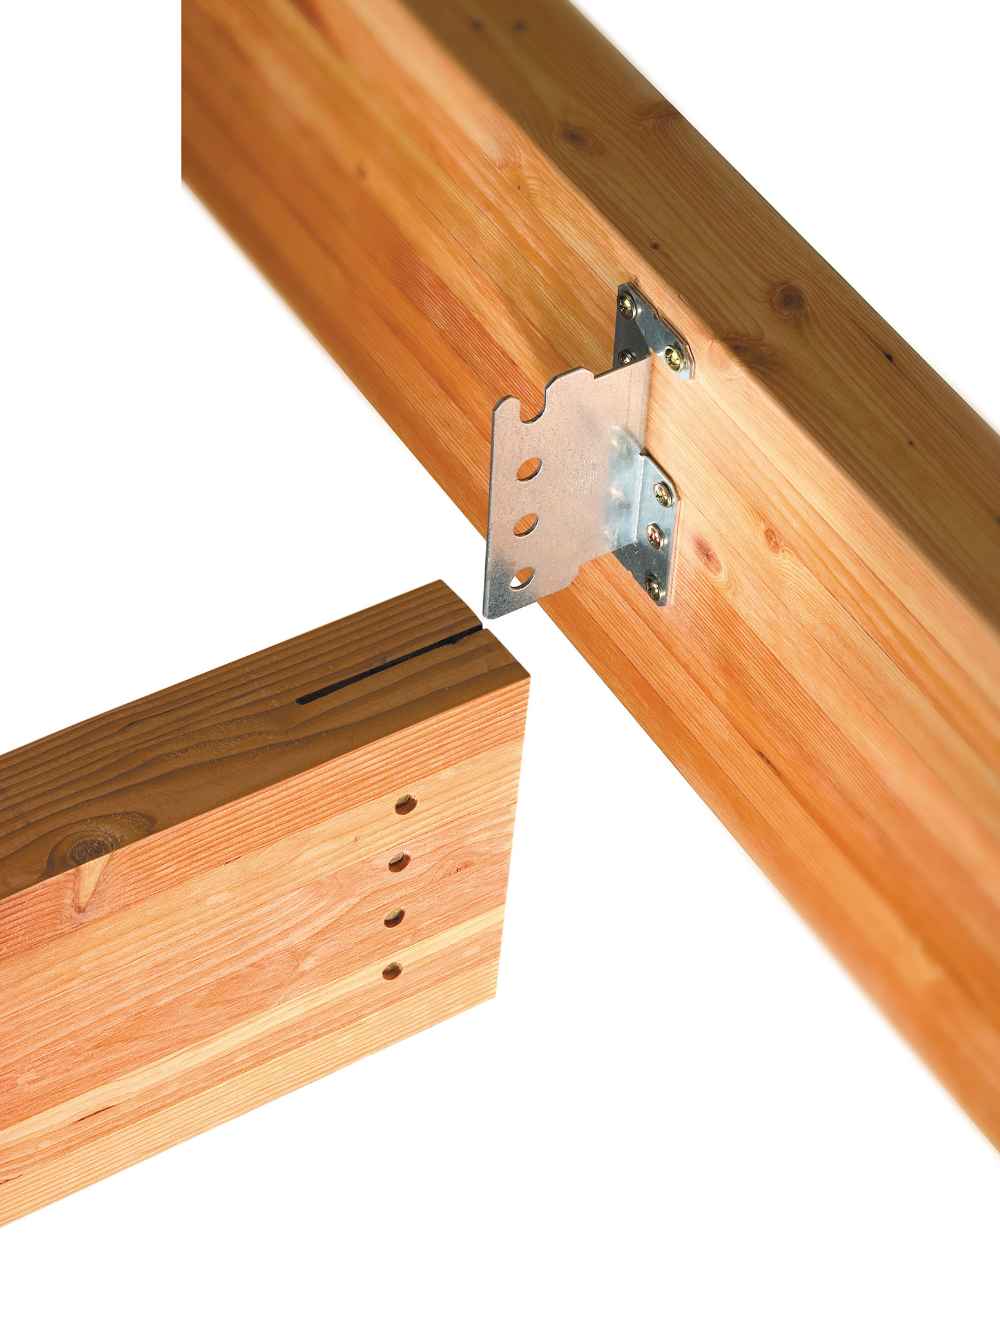 Simpson CJT5ZL Concealed Joist Tie w Long Pins ZMAX Finish image 3 of 5